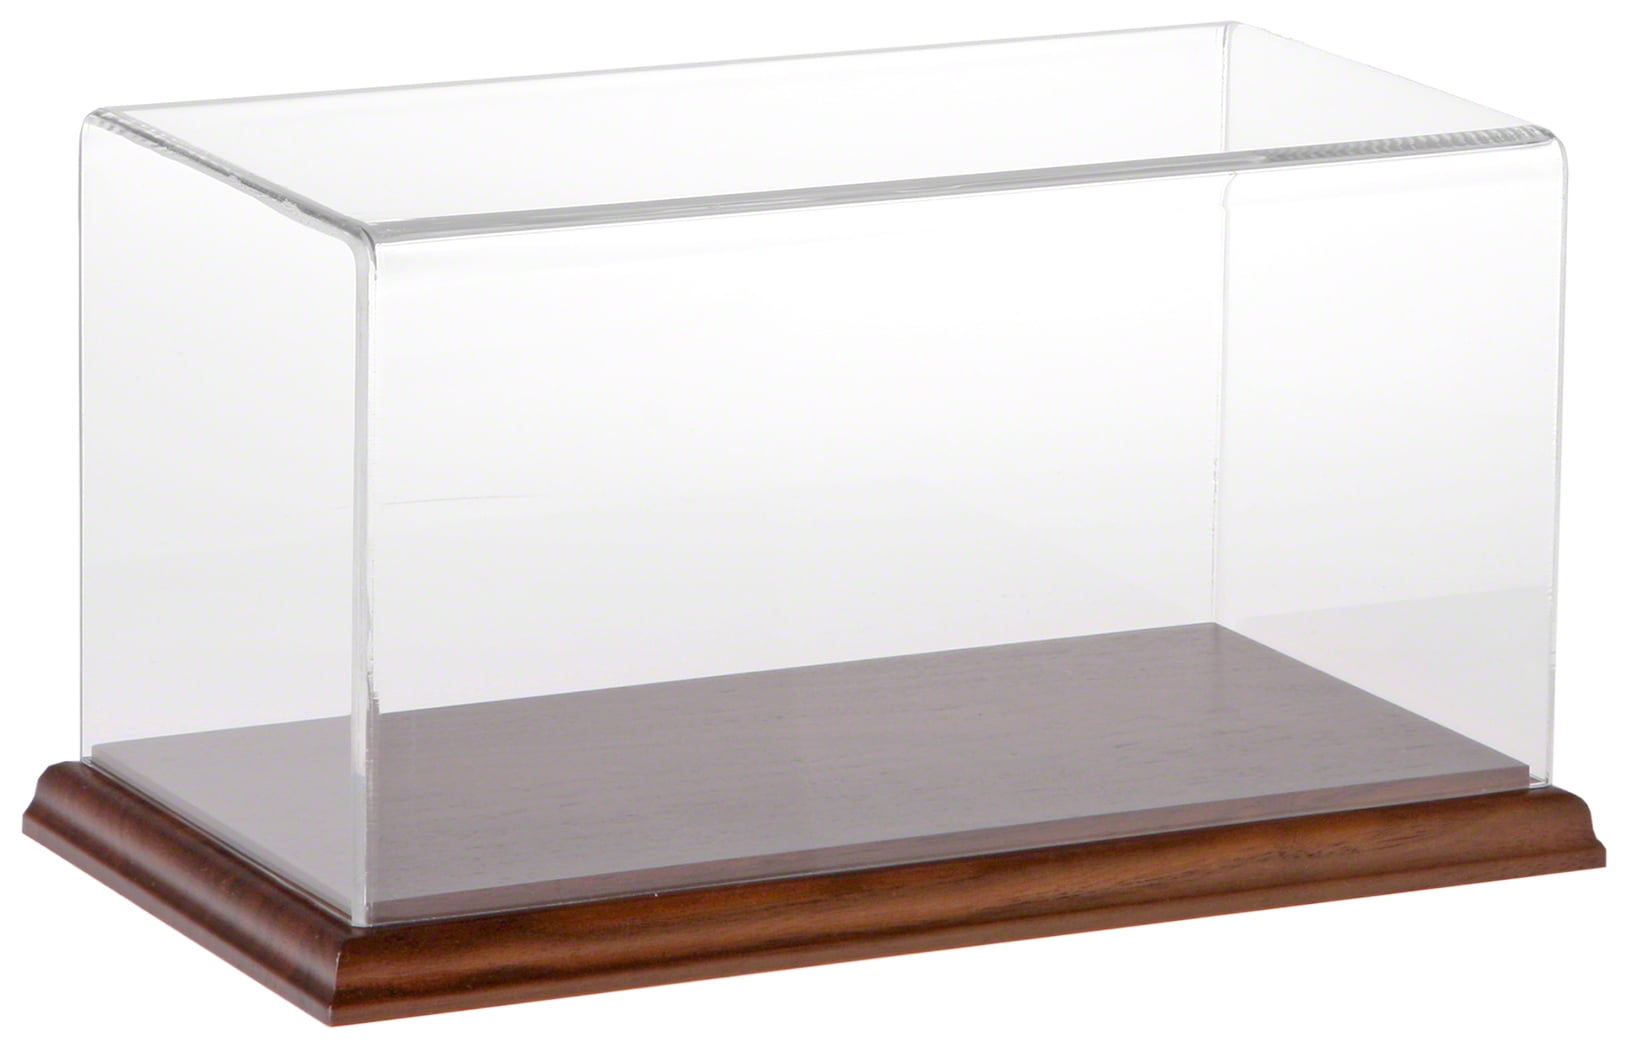 1 NEW 11x11x23 ExpoCase 19"-22" Doll Clear Display Case 